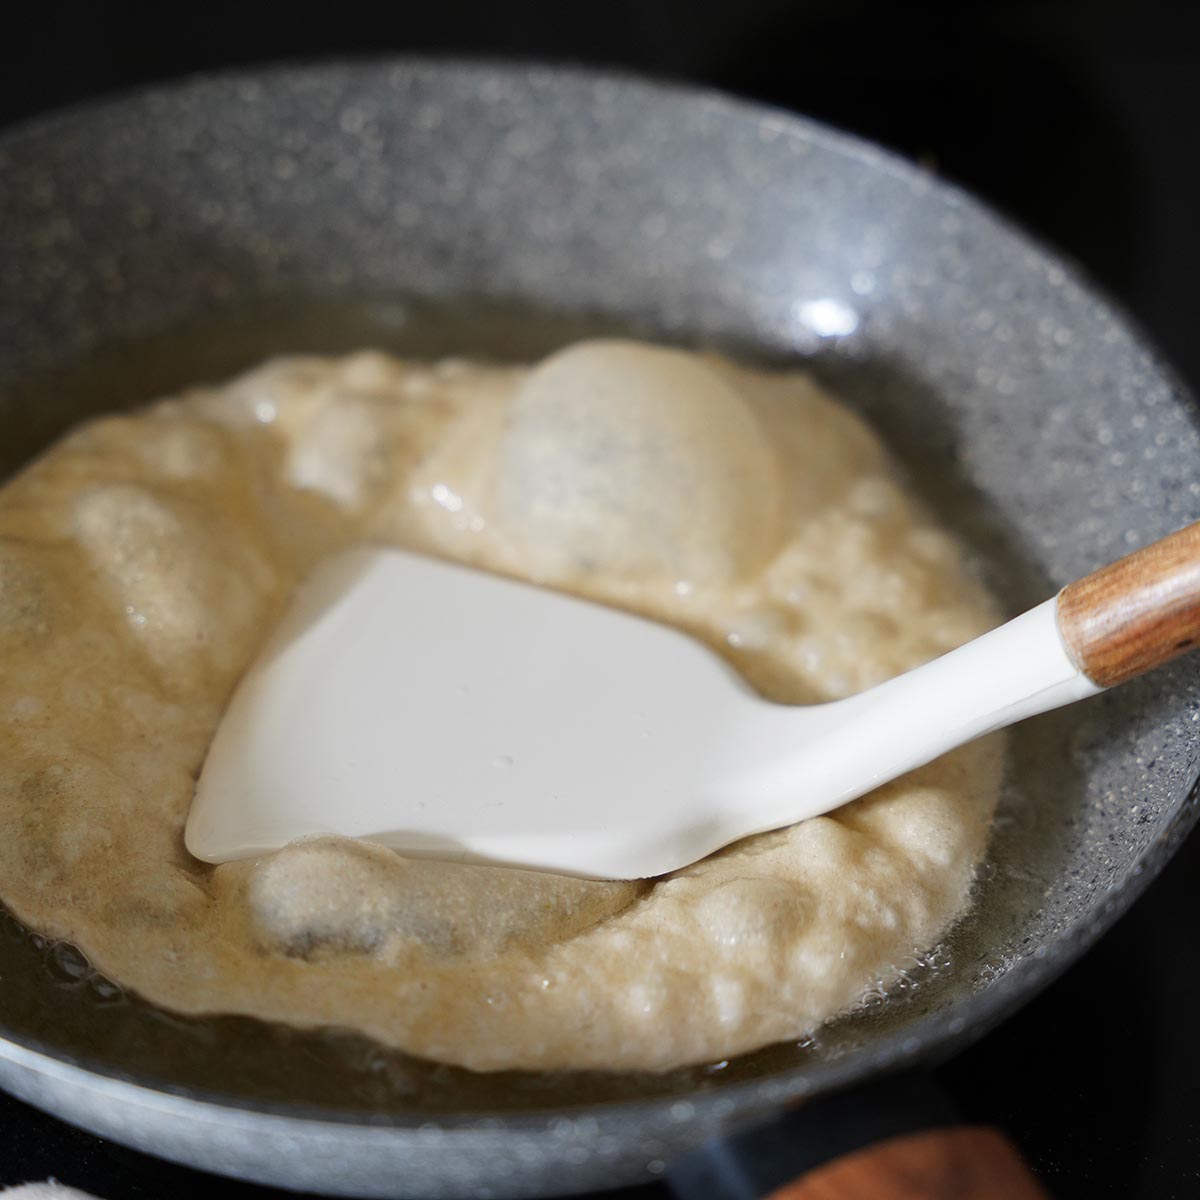 Frying the flattened dough in hot oil. A spatula pressing it down while it fryes.